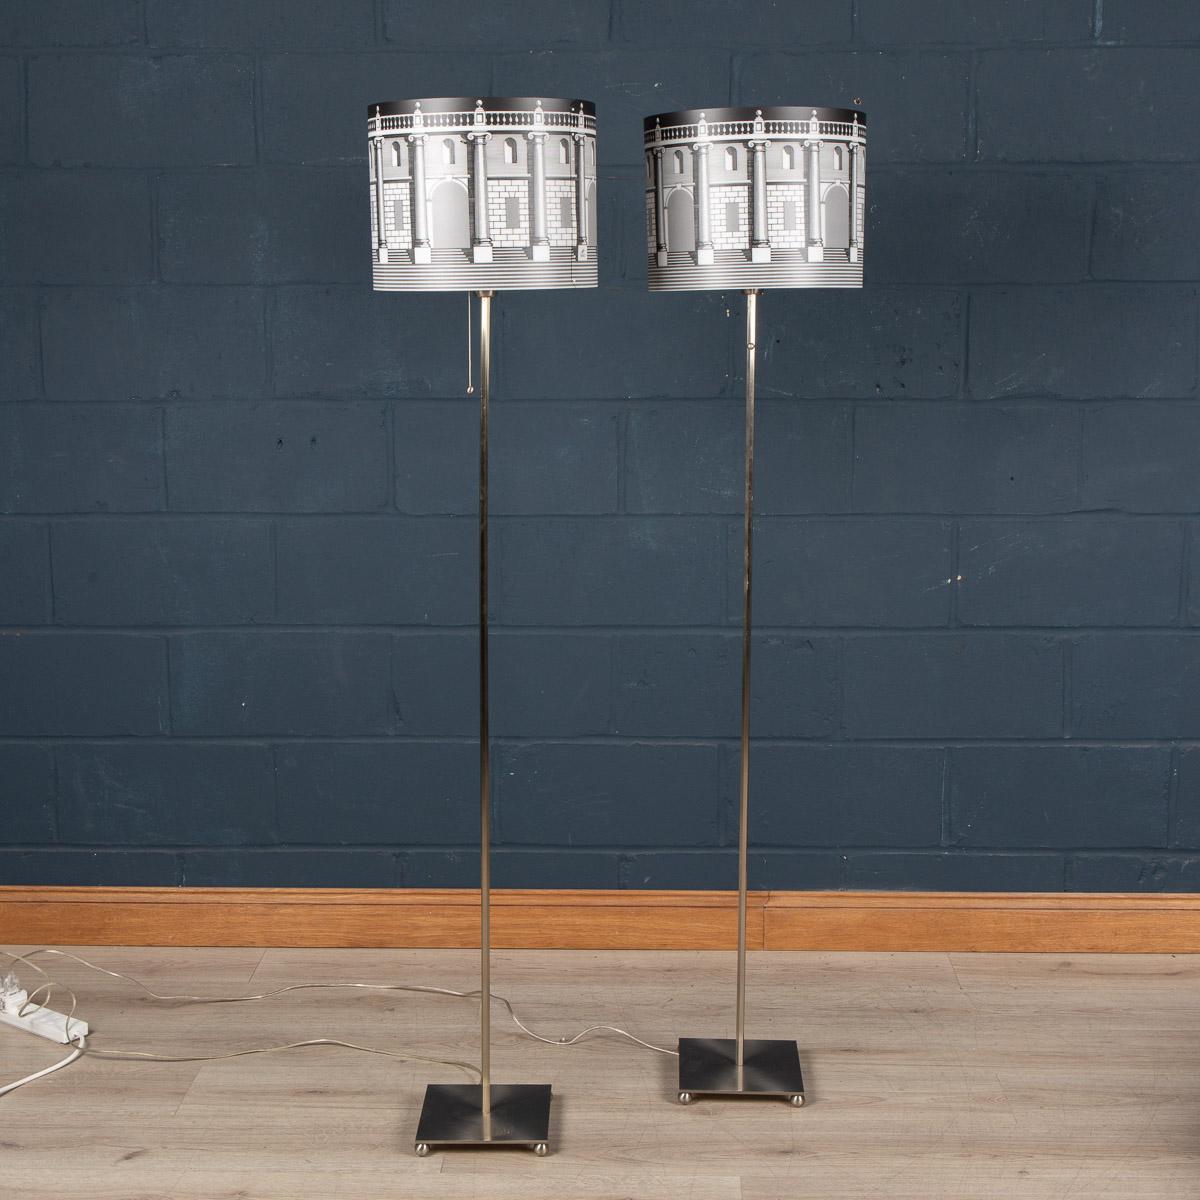 A beautiful pair of floor lamps by Piero Fornasetti. This particular model retailed by Antonangeli in the 1990s, now discontinued and appreciating in value. More importantly it gives any room a very chic twist on lighting with its brushed steel